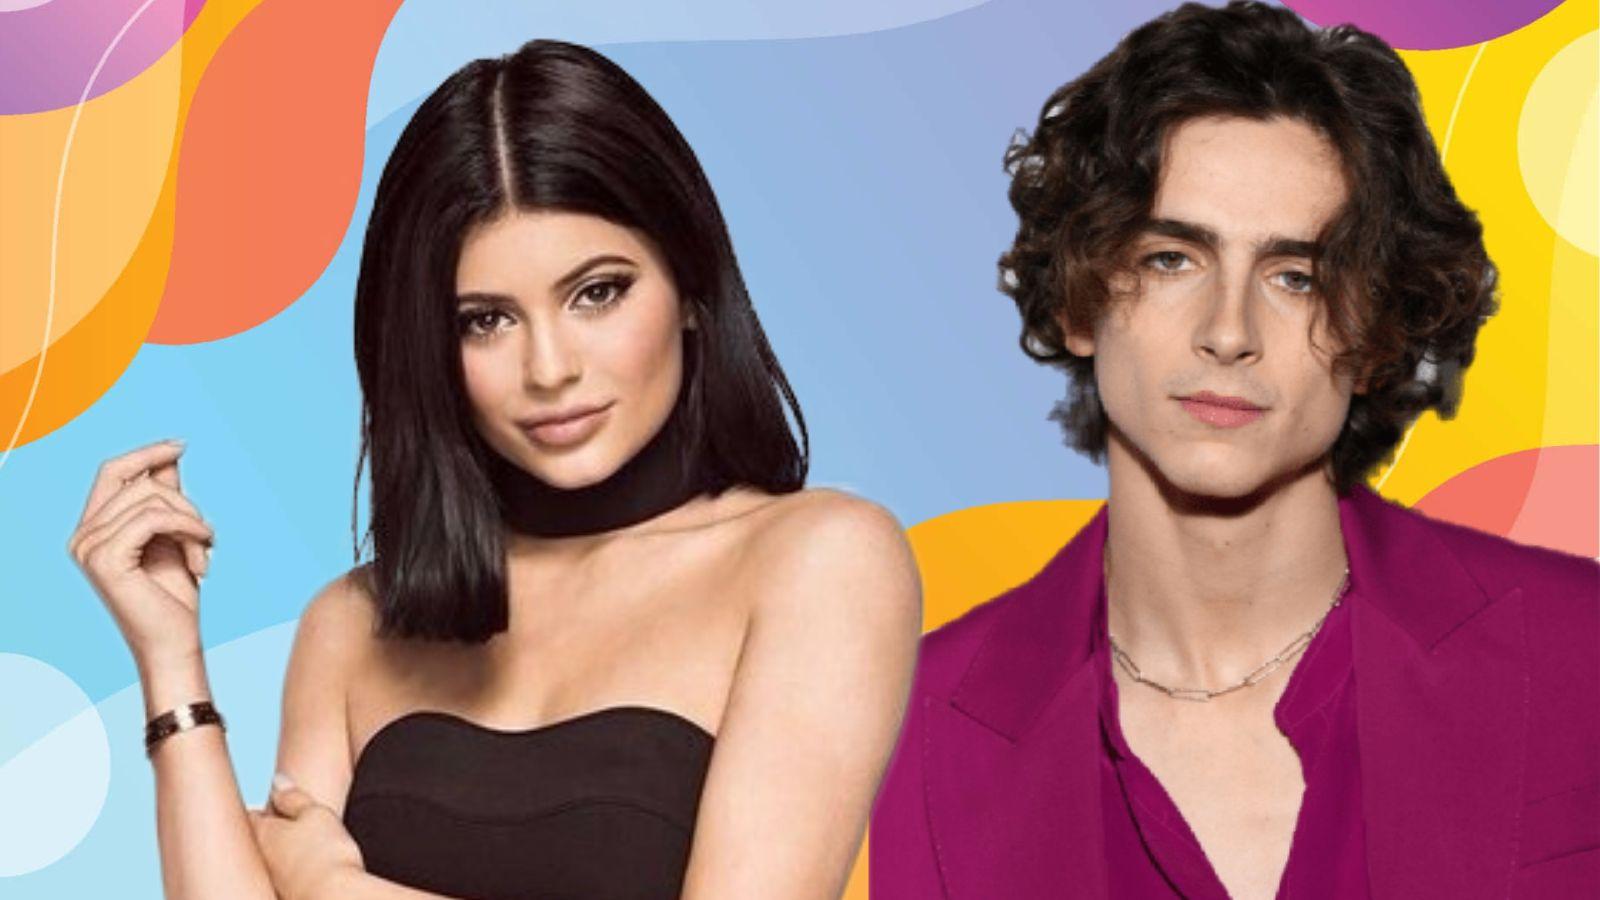 Will Kylie Jenner's romance with Timothee Chalamet be in The Kardashian's  Season 4? - Dexerto